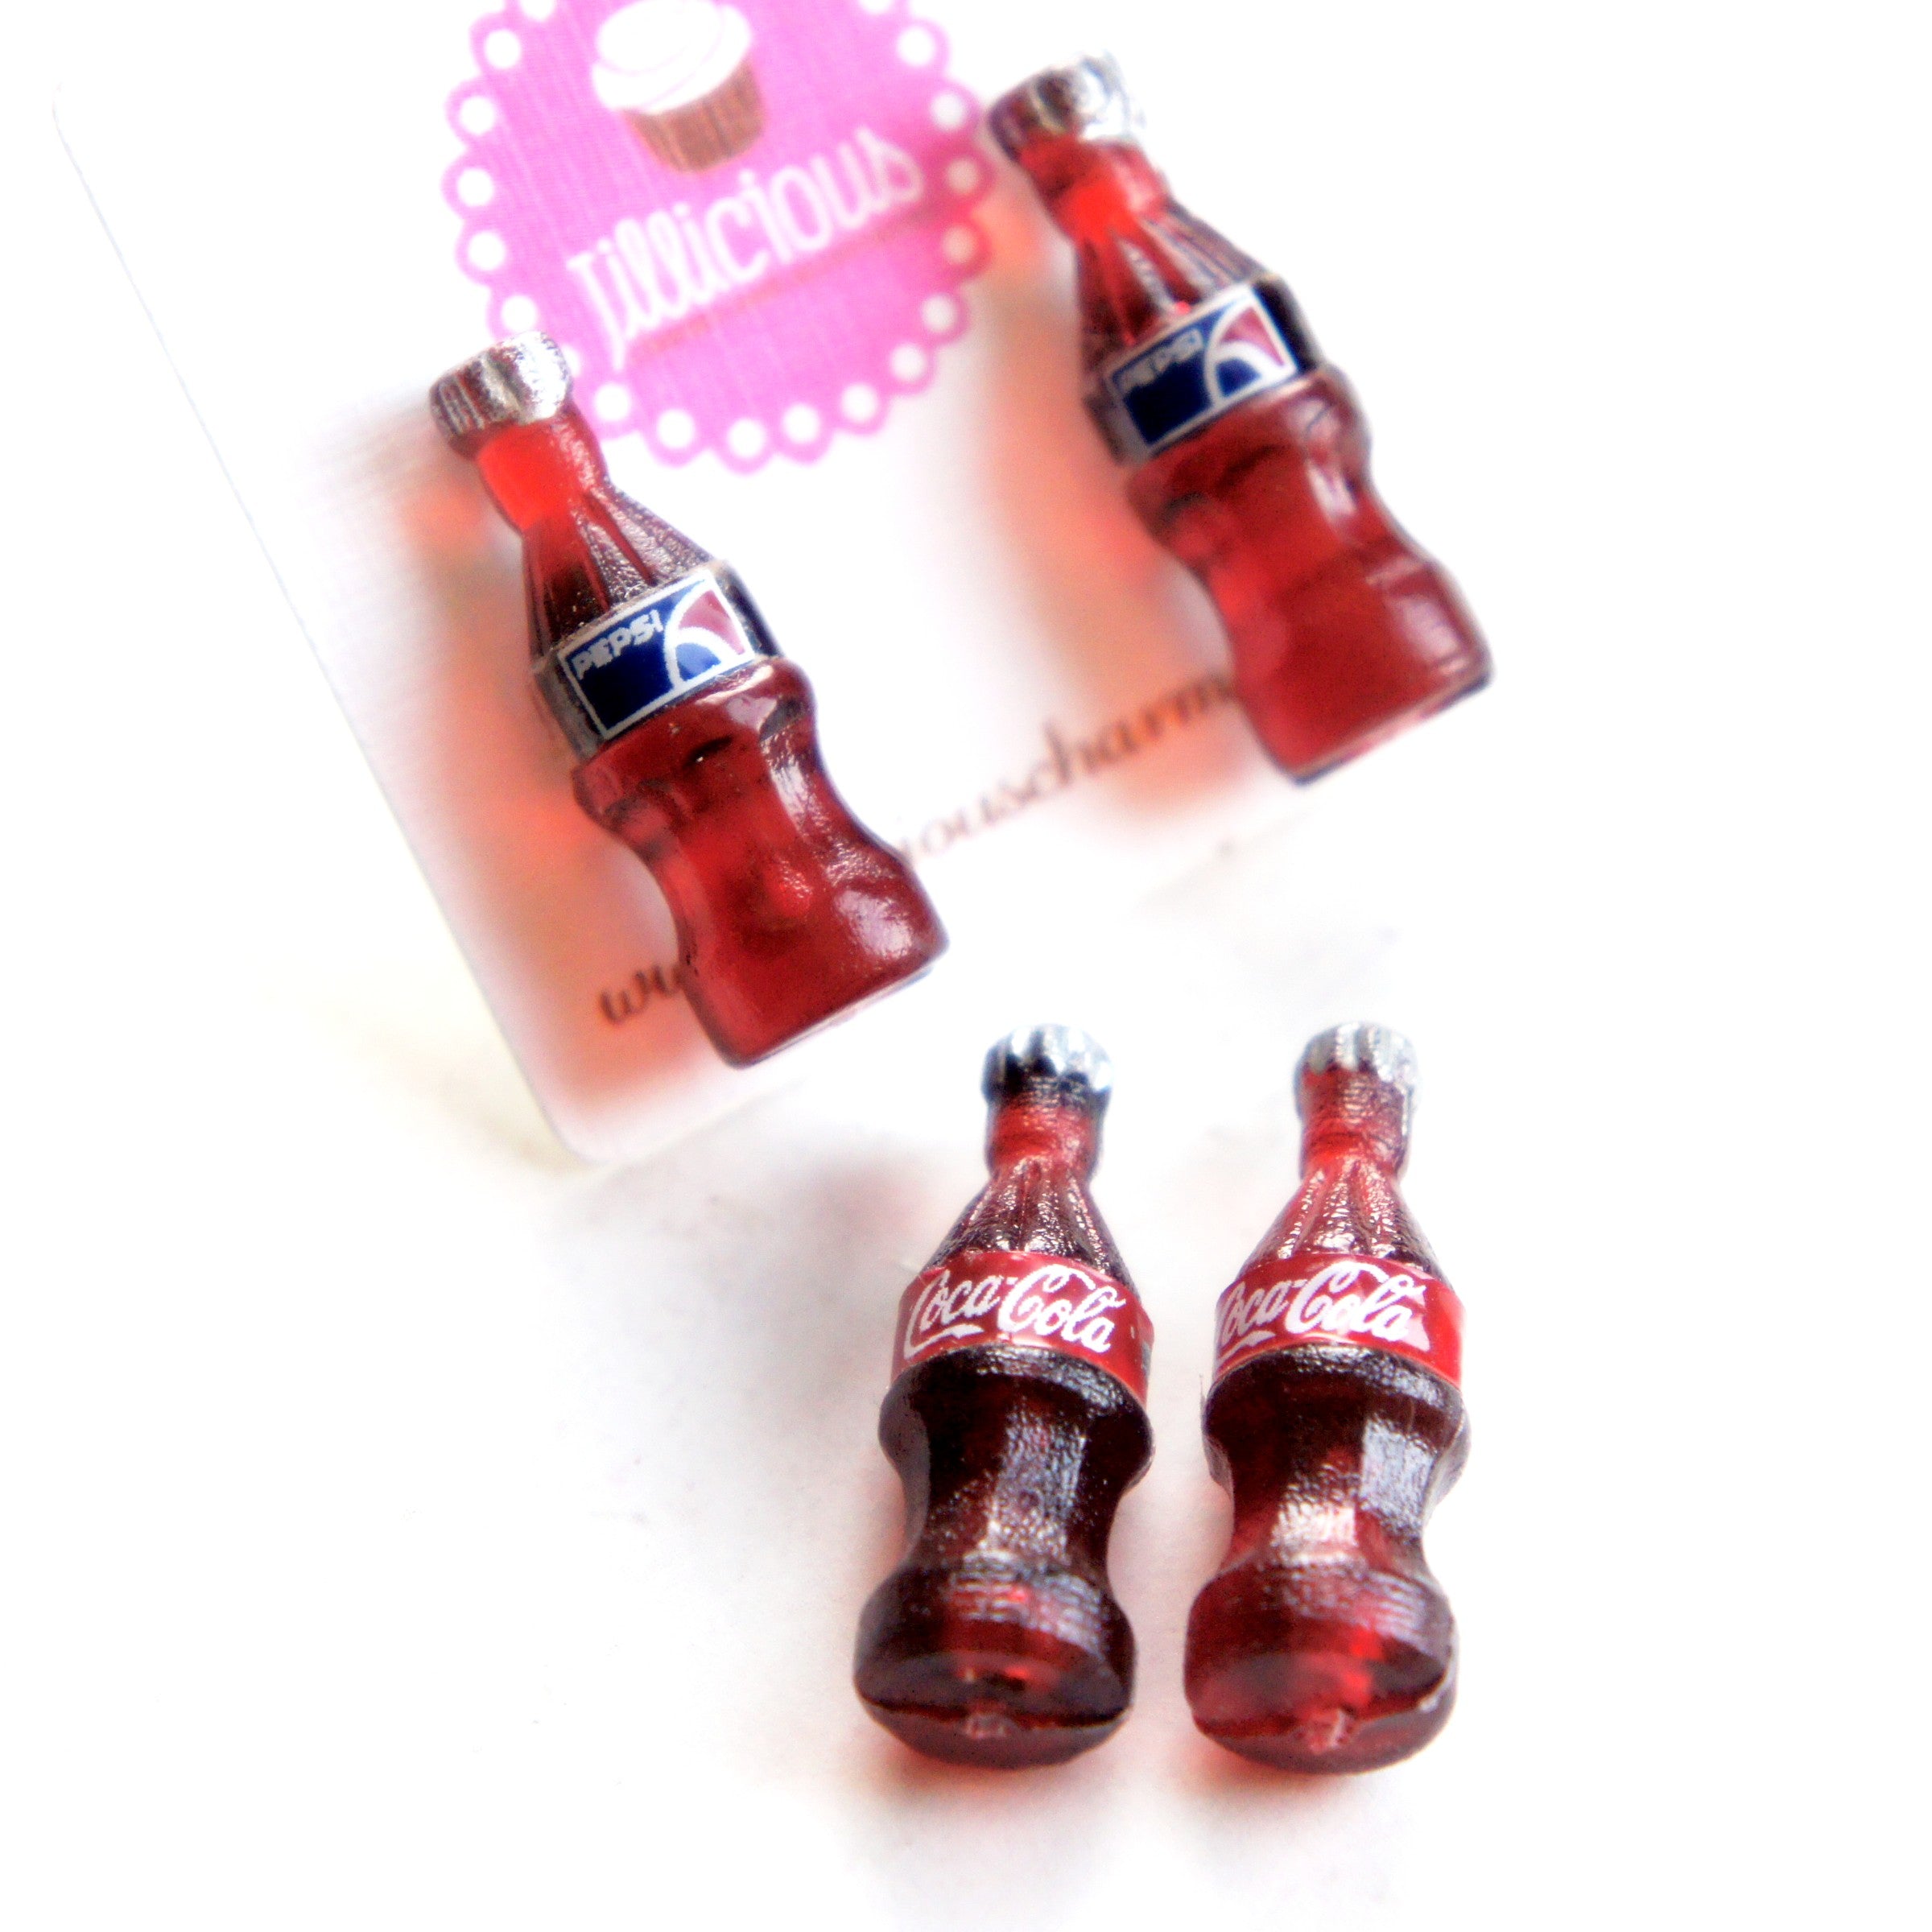 Soda Bottle Earrings - Jillicious charms and accessories